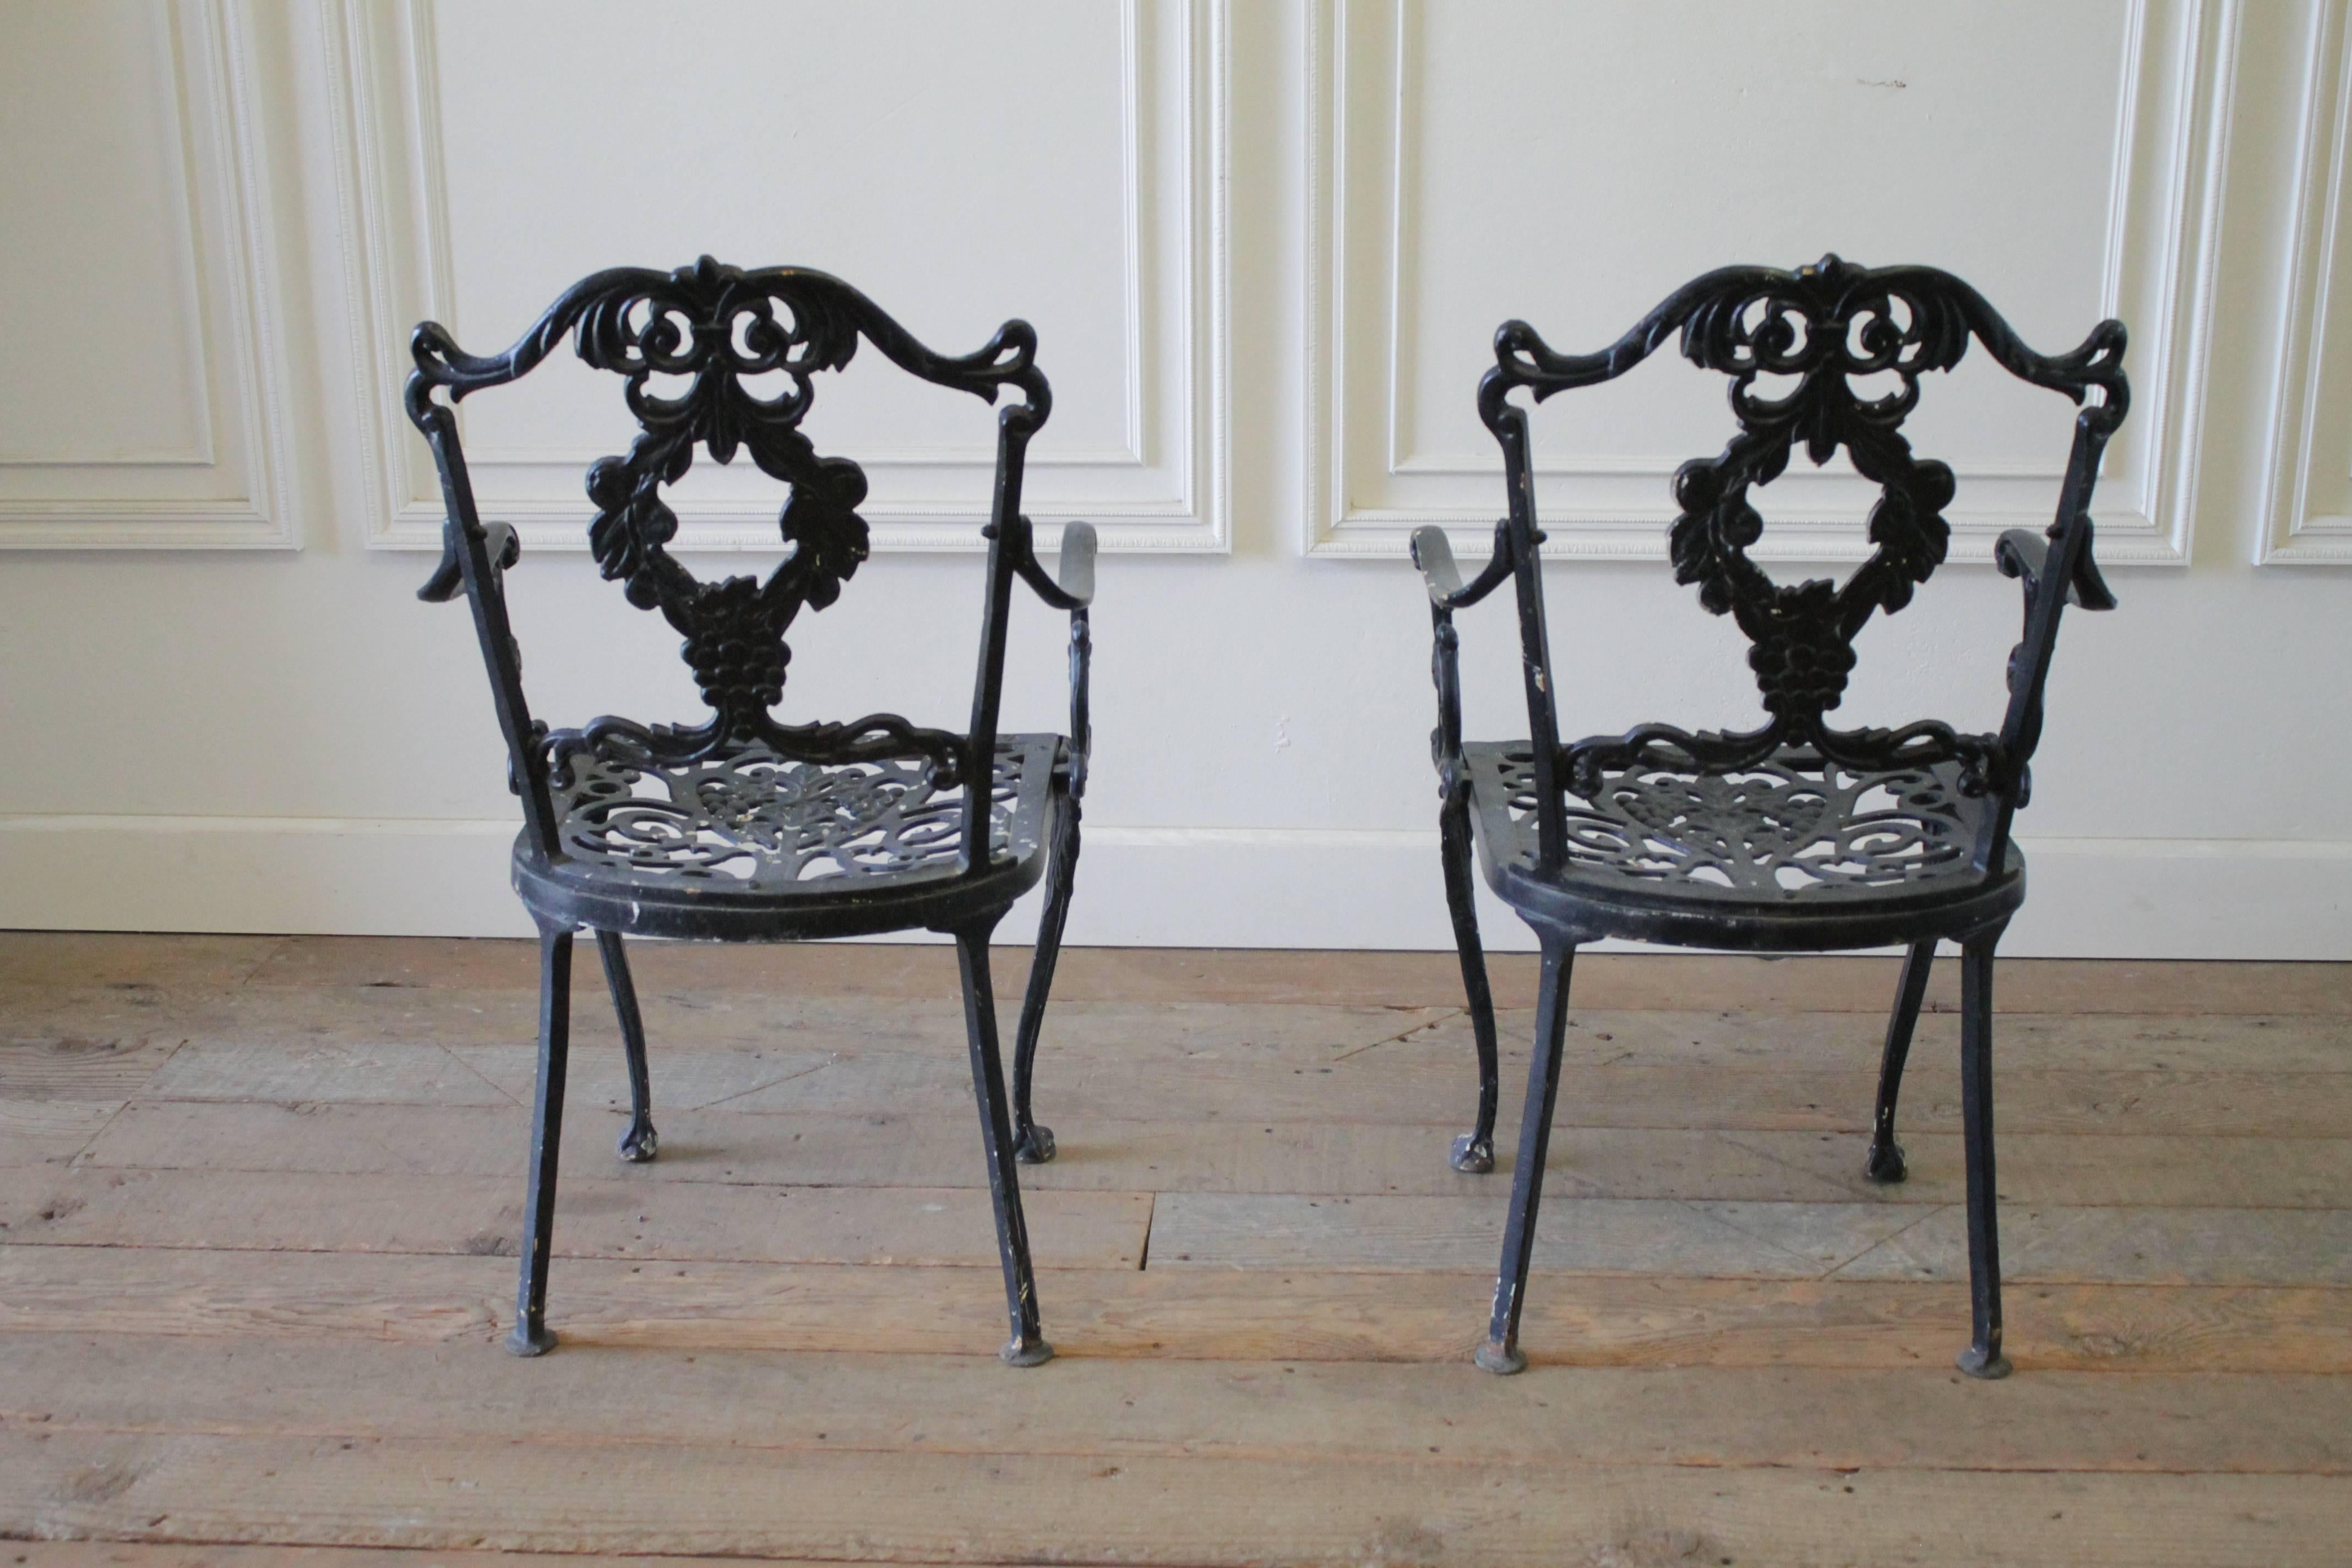 Black cast iron garden chairs with decorative backs. These pair of arm chairs can be refinished in a powder coat or outdoor paint.
Measures 20